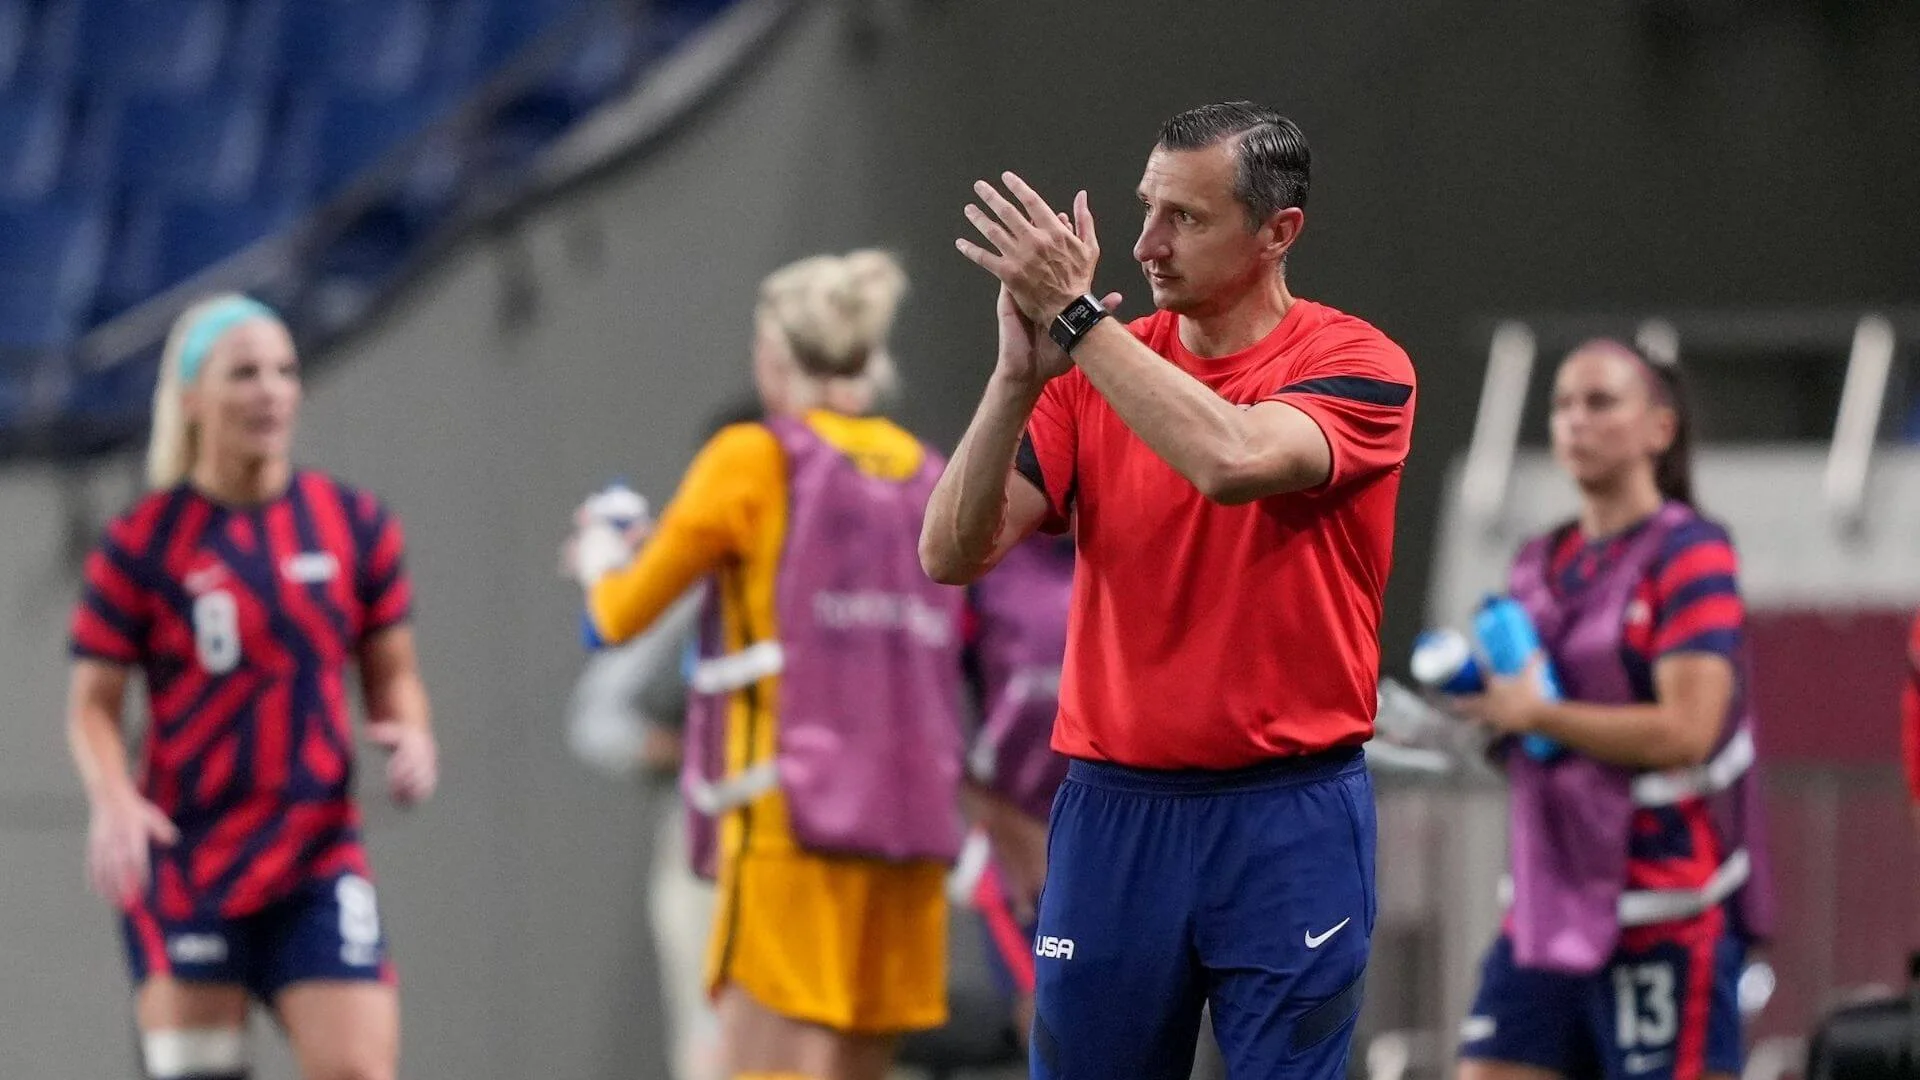 Vlatko Andonovski coached the USWNT to a bronze medal at the Olympics